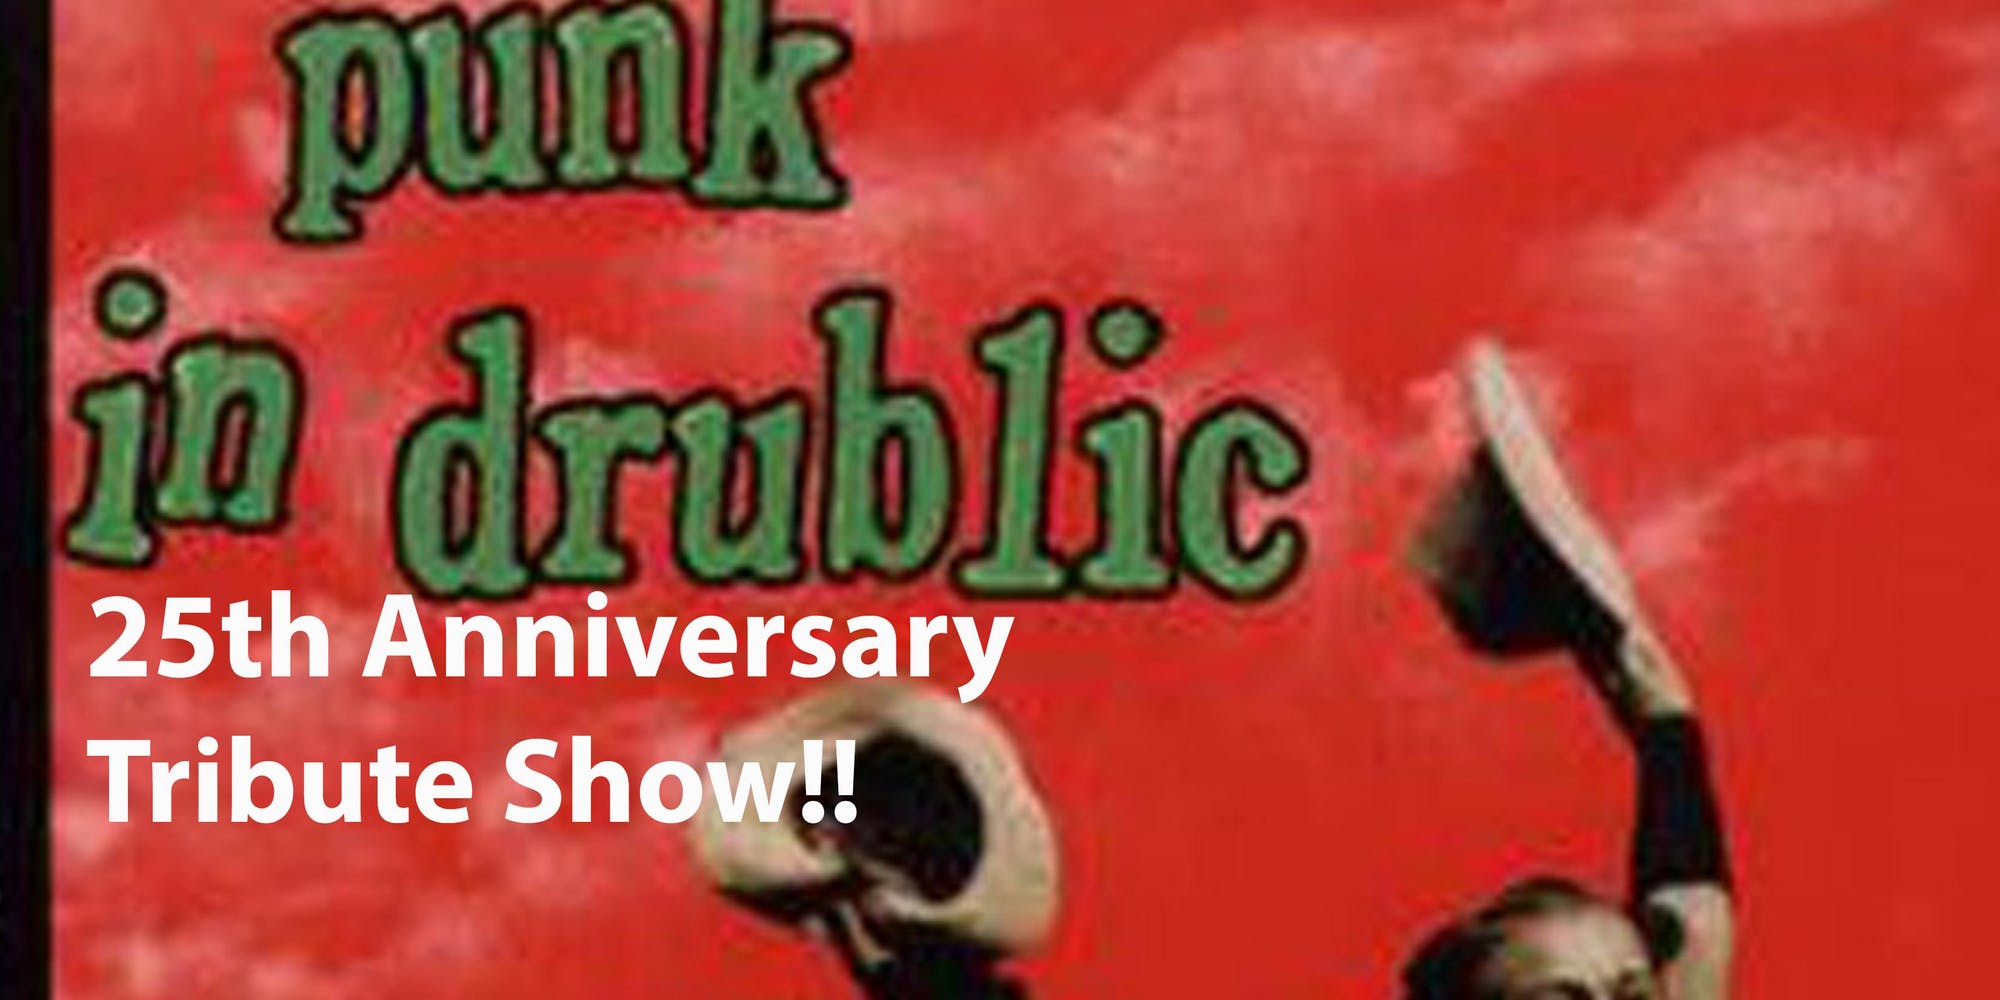 A poster for Punk in Drublic 25th Anniversary Tribute Show. The image is mostly text on a red background. A person waving two hats in the air is cropped out in the bottom.